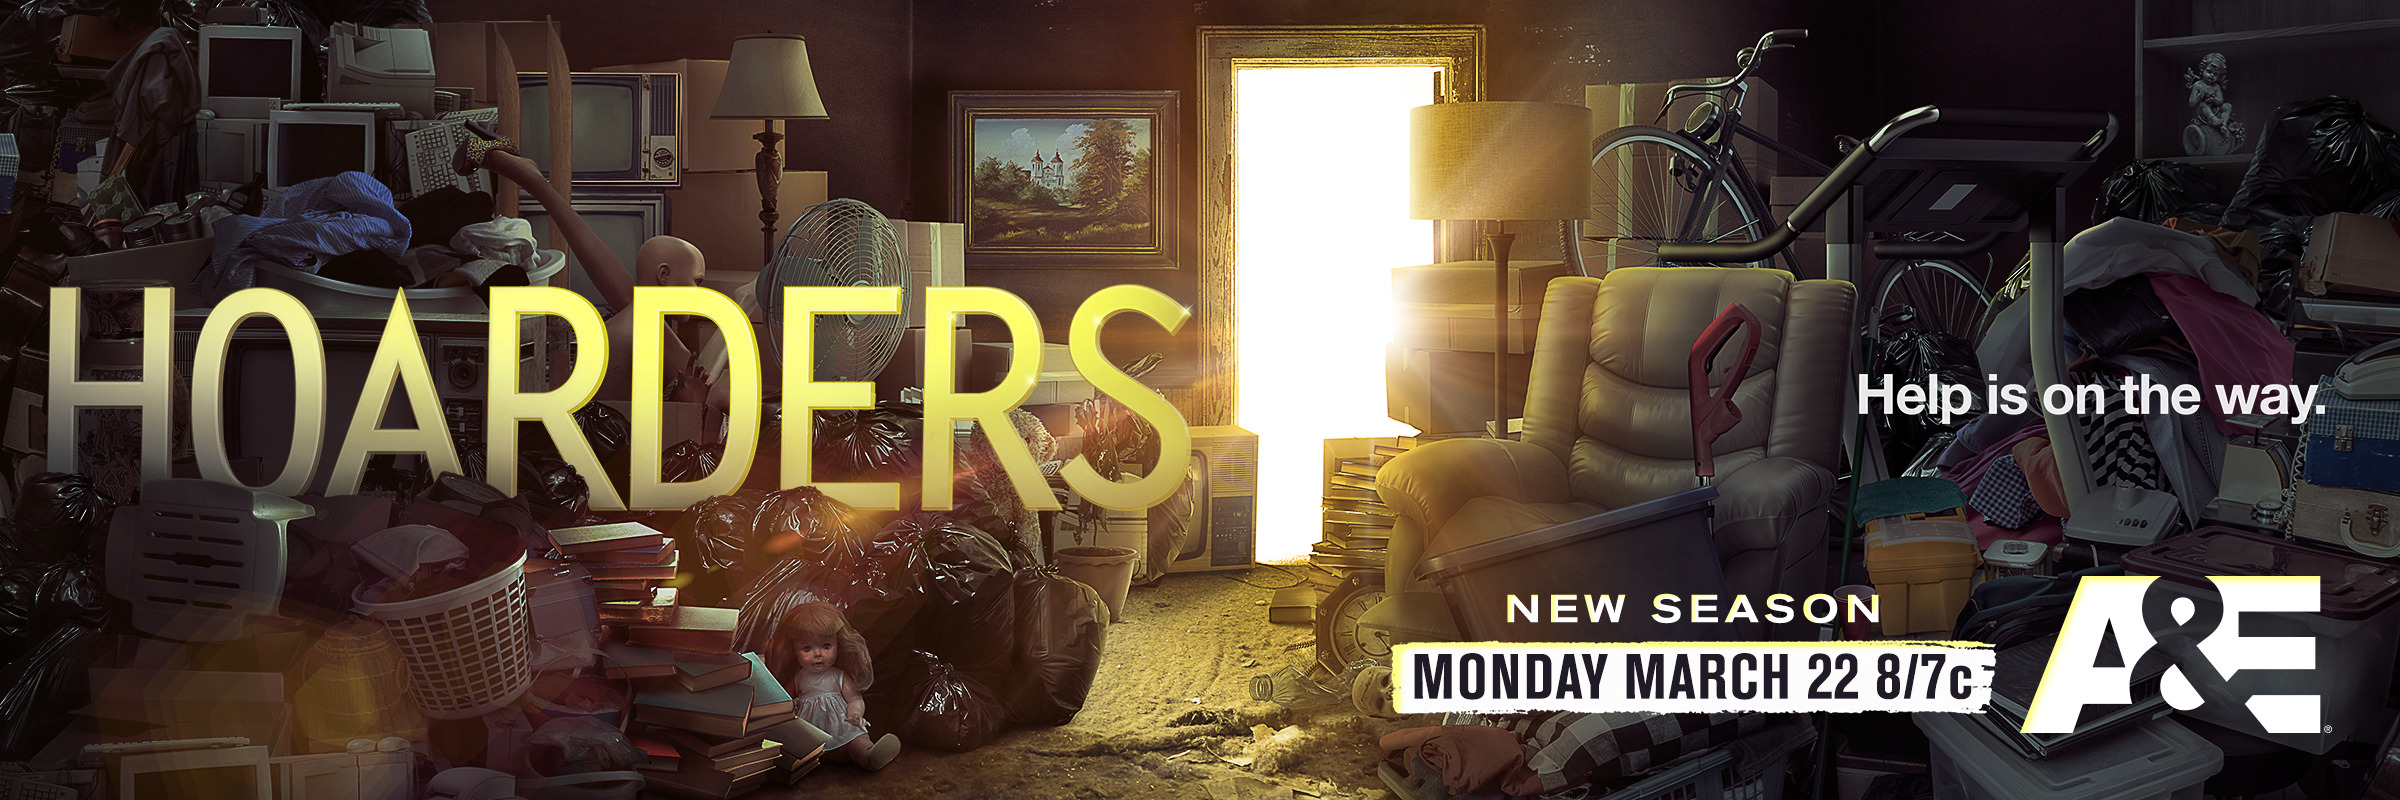 Mega Sized TV Poster Image for Hoarders (#4 of 6)